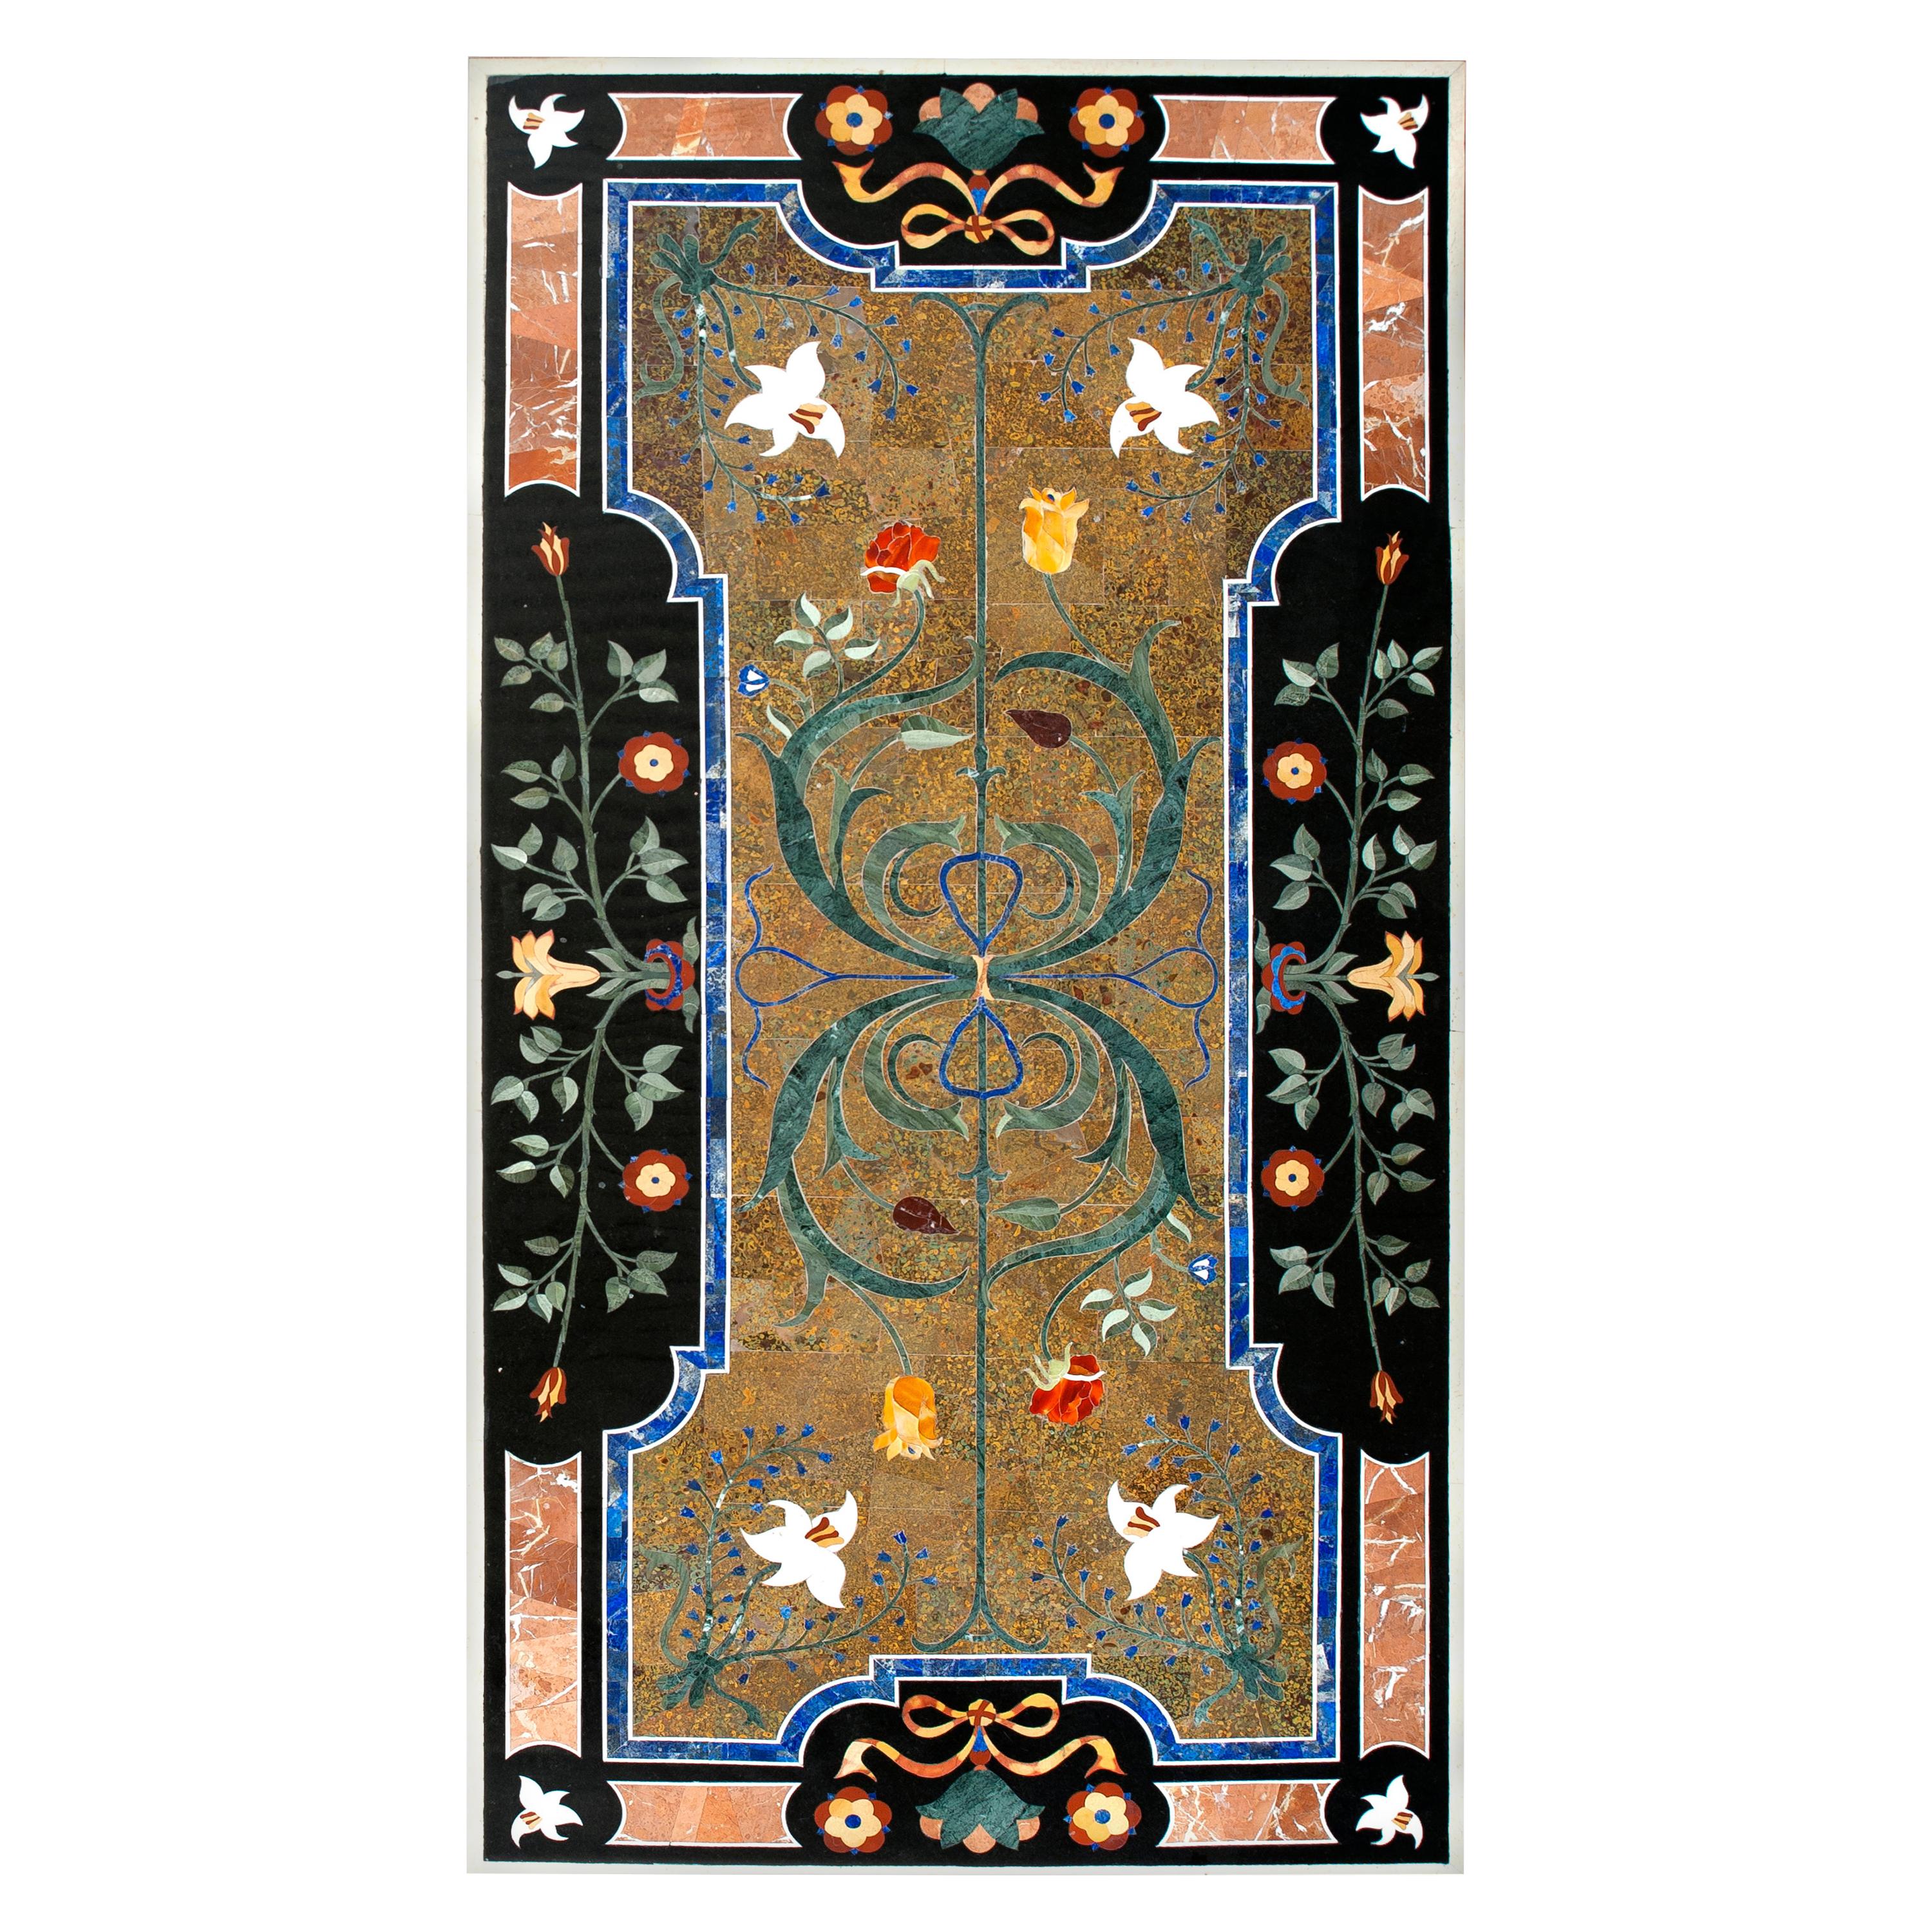 Pietra Dura or Hard Stones Tabletop For Sale